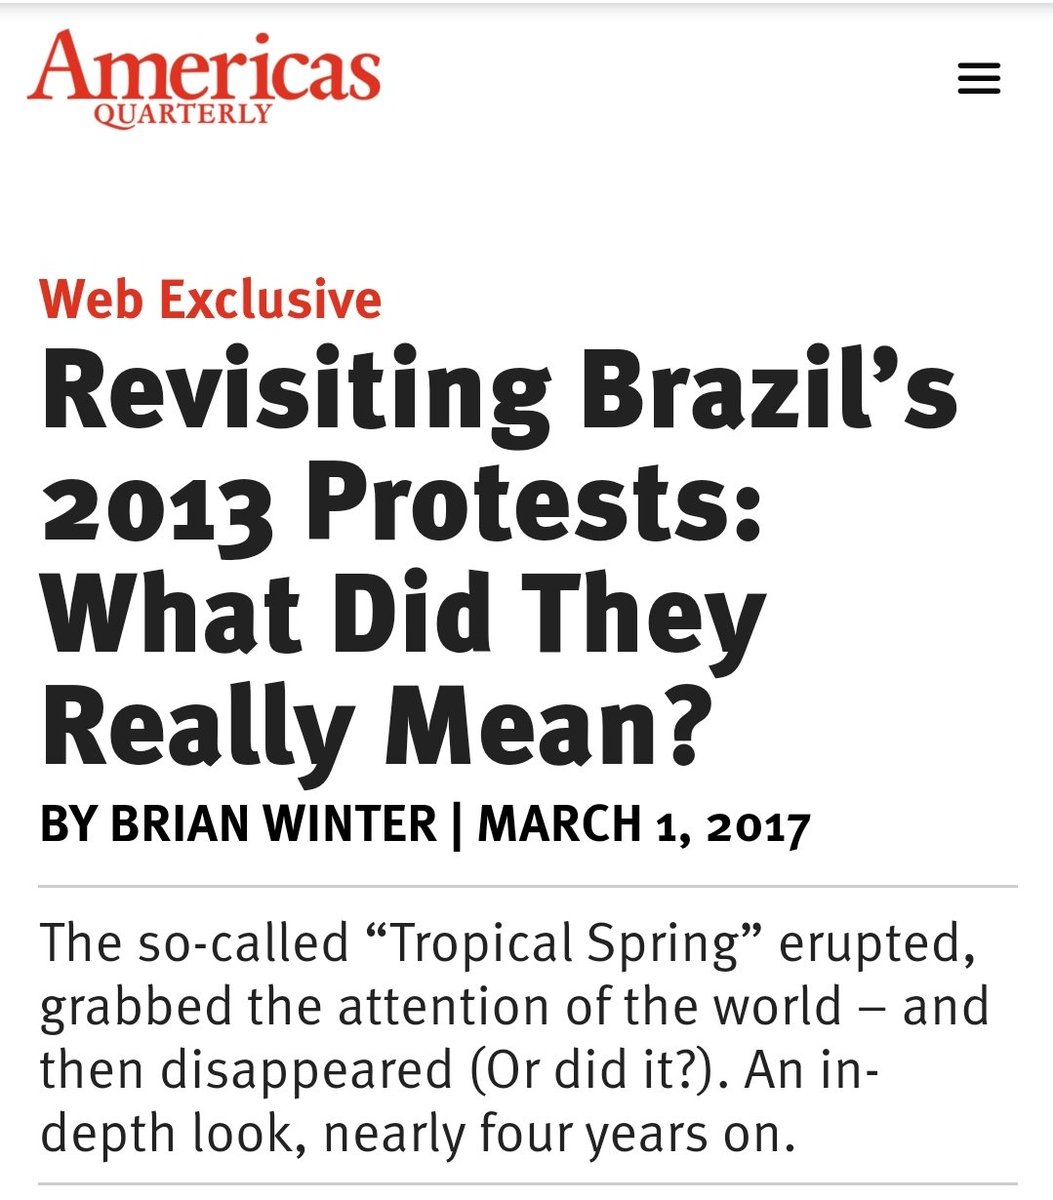 (Although the color revolution started in 2013. The reasons for the initial protests - high cost of public transport - had already been subverted. These guys hint at this, but won't say it in so many words.)